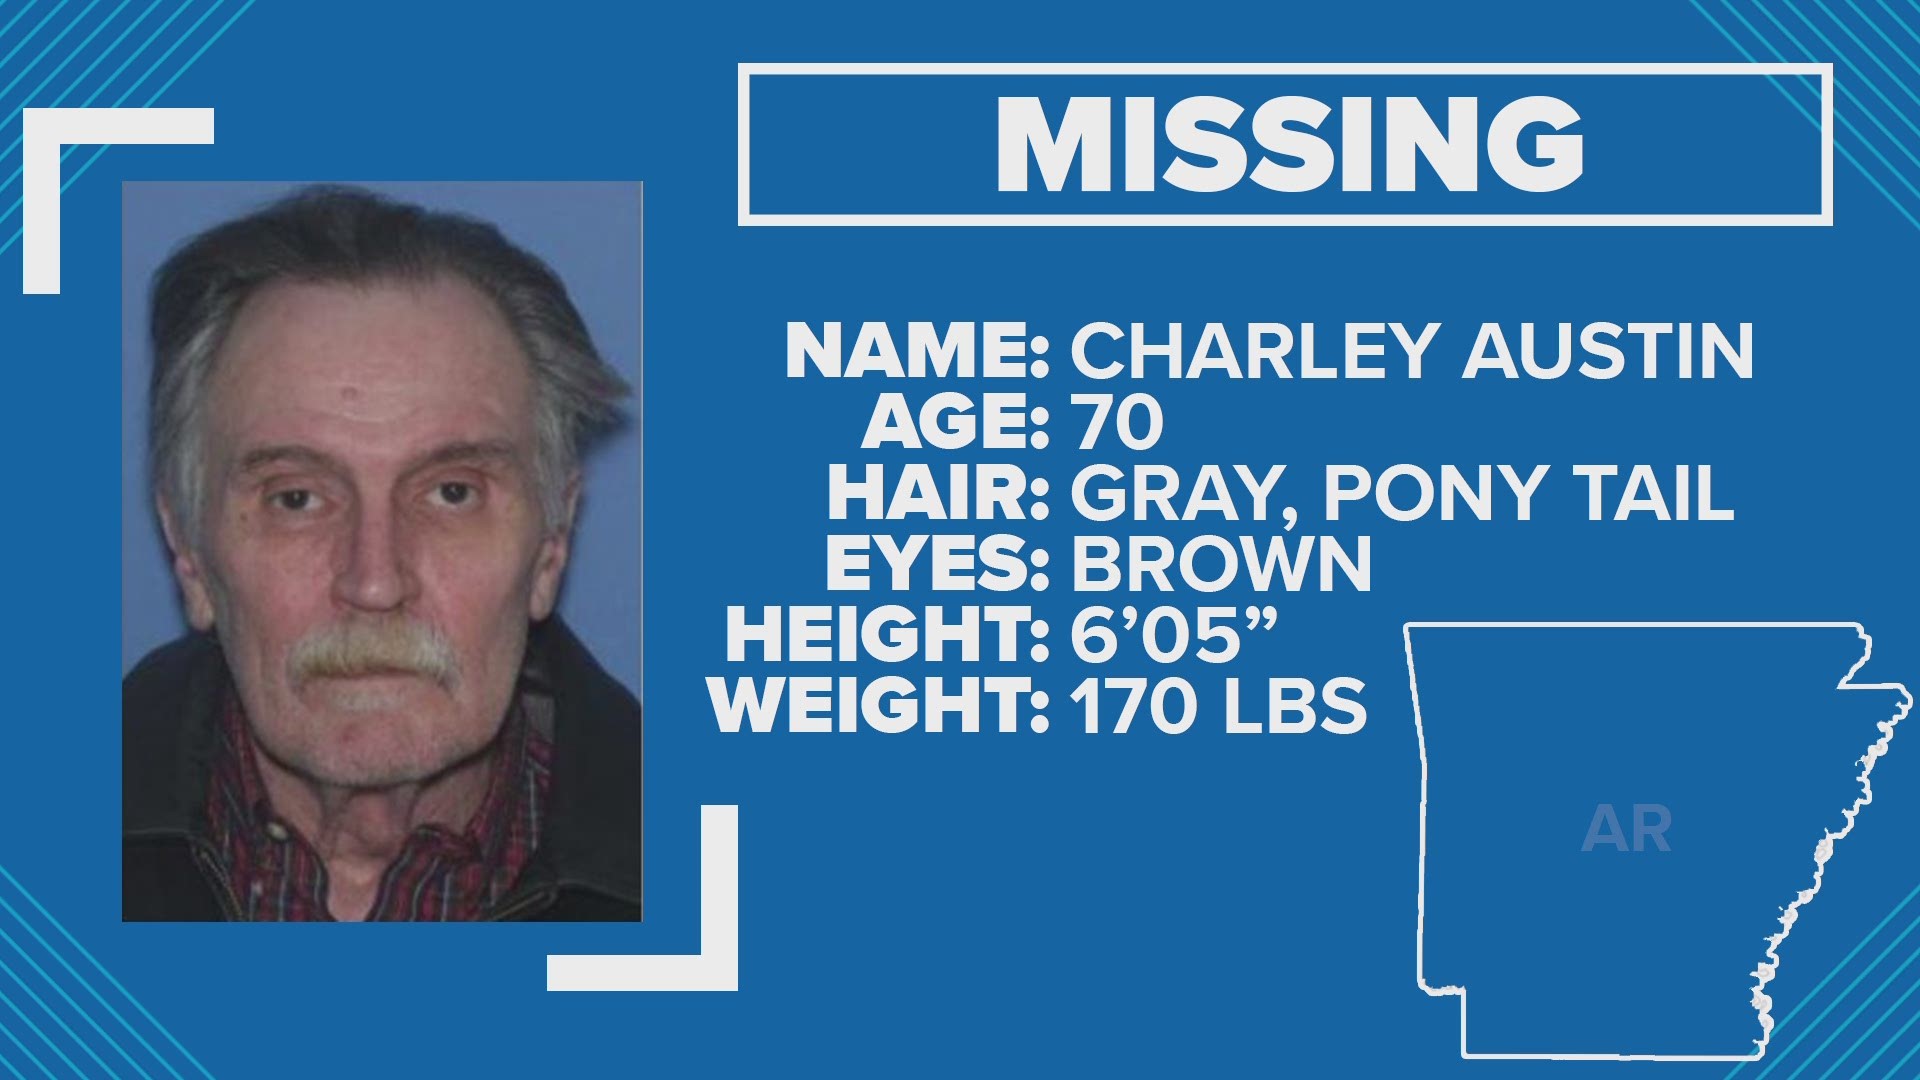 Charley Austin was last known to be on Hwy 71 S. near Breeden Dodge in Fort Smith.